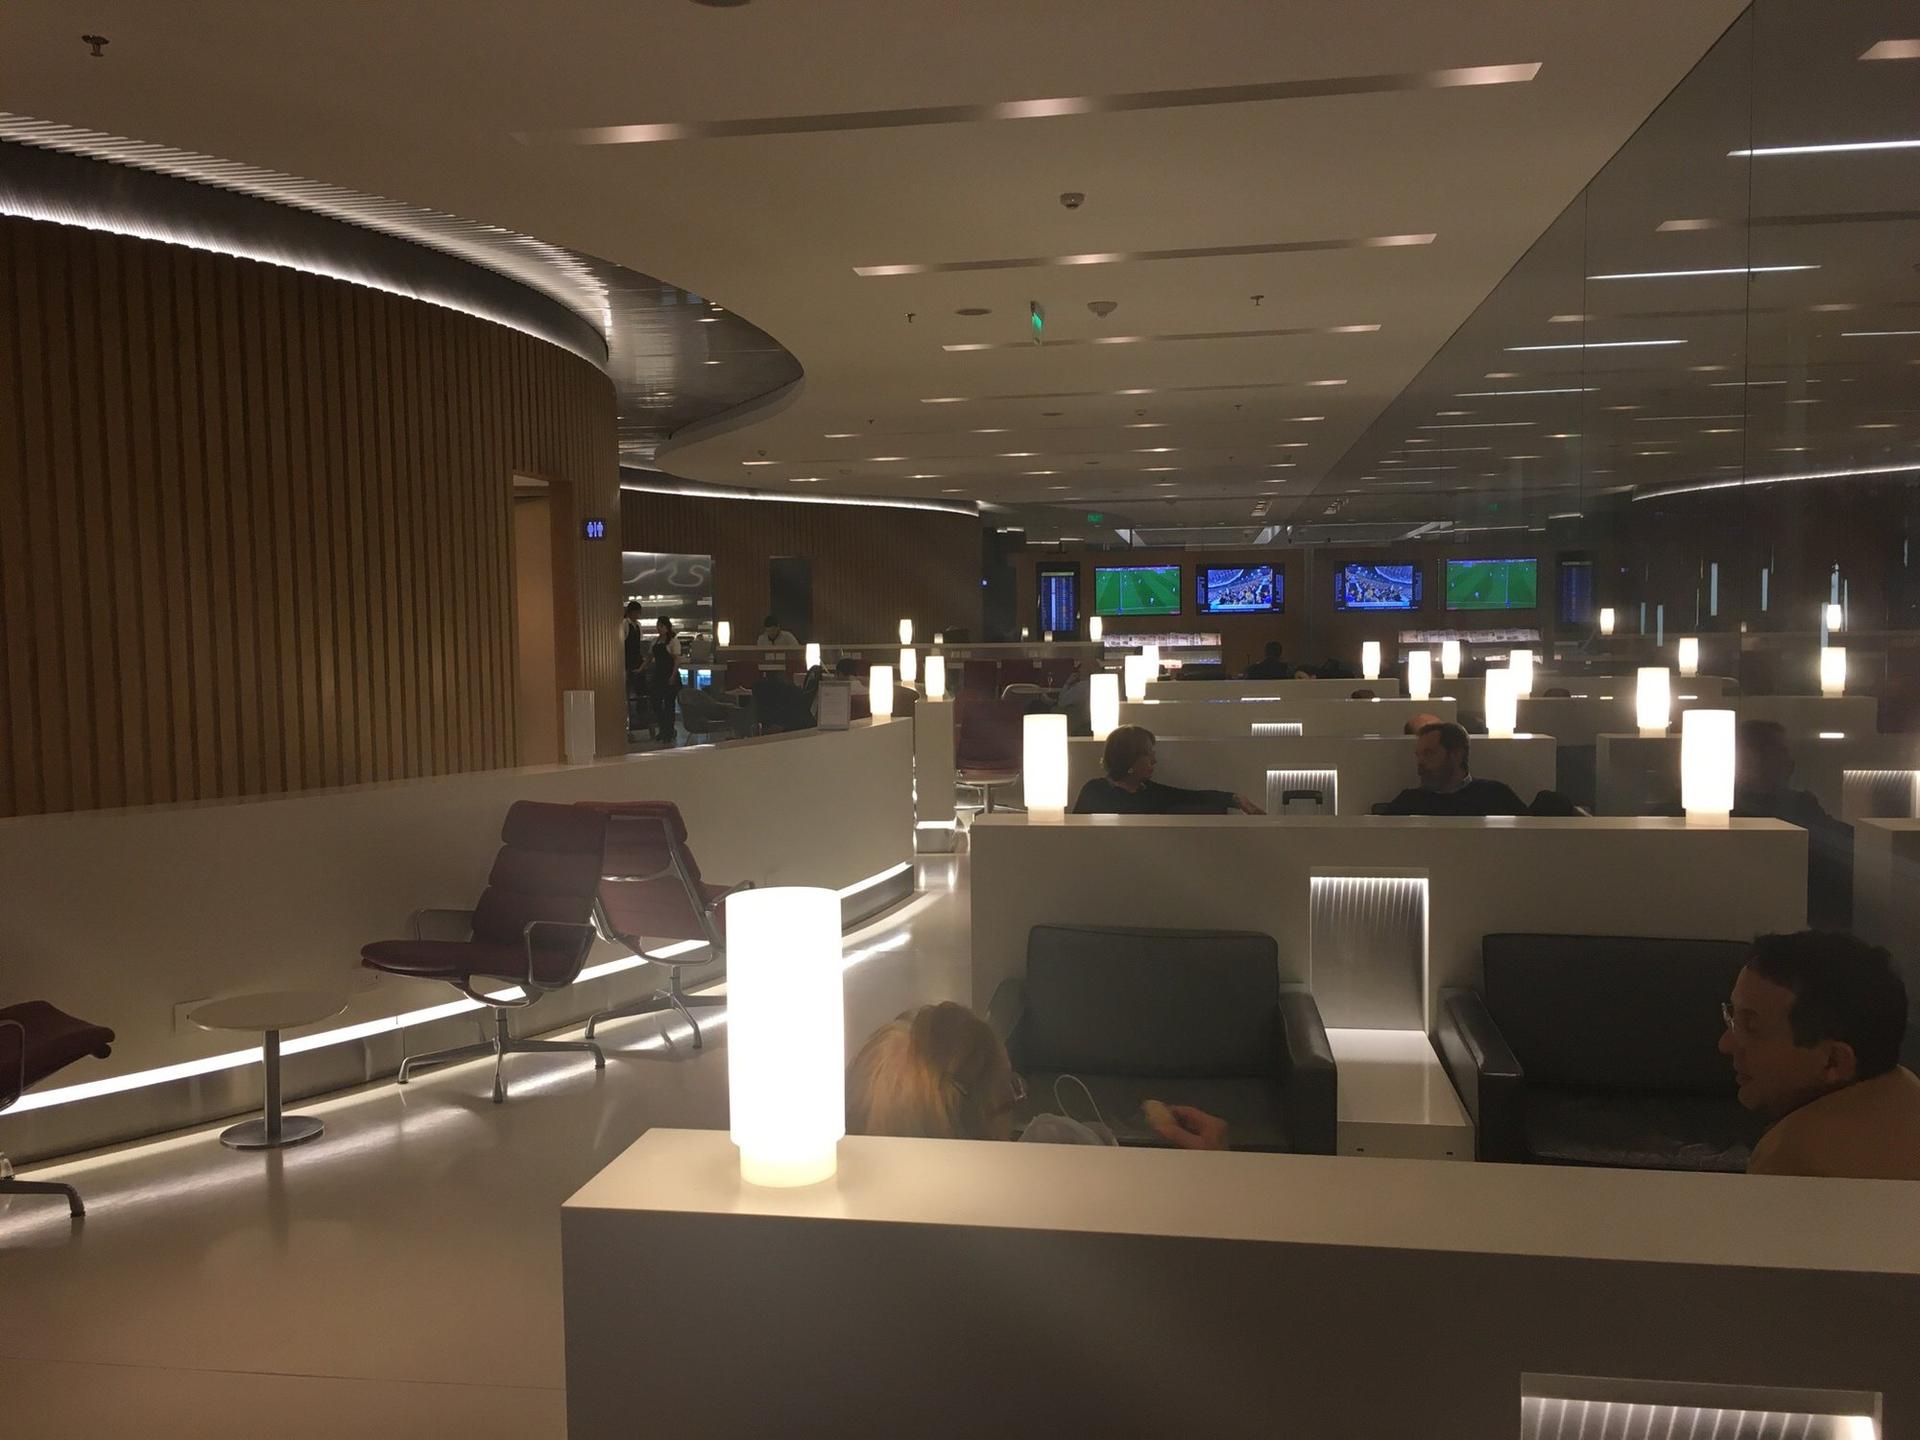 American Airlines Admirals Club & Iberia VIP Lounge image 9 of 18